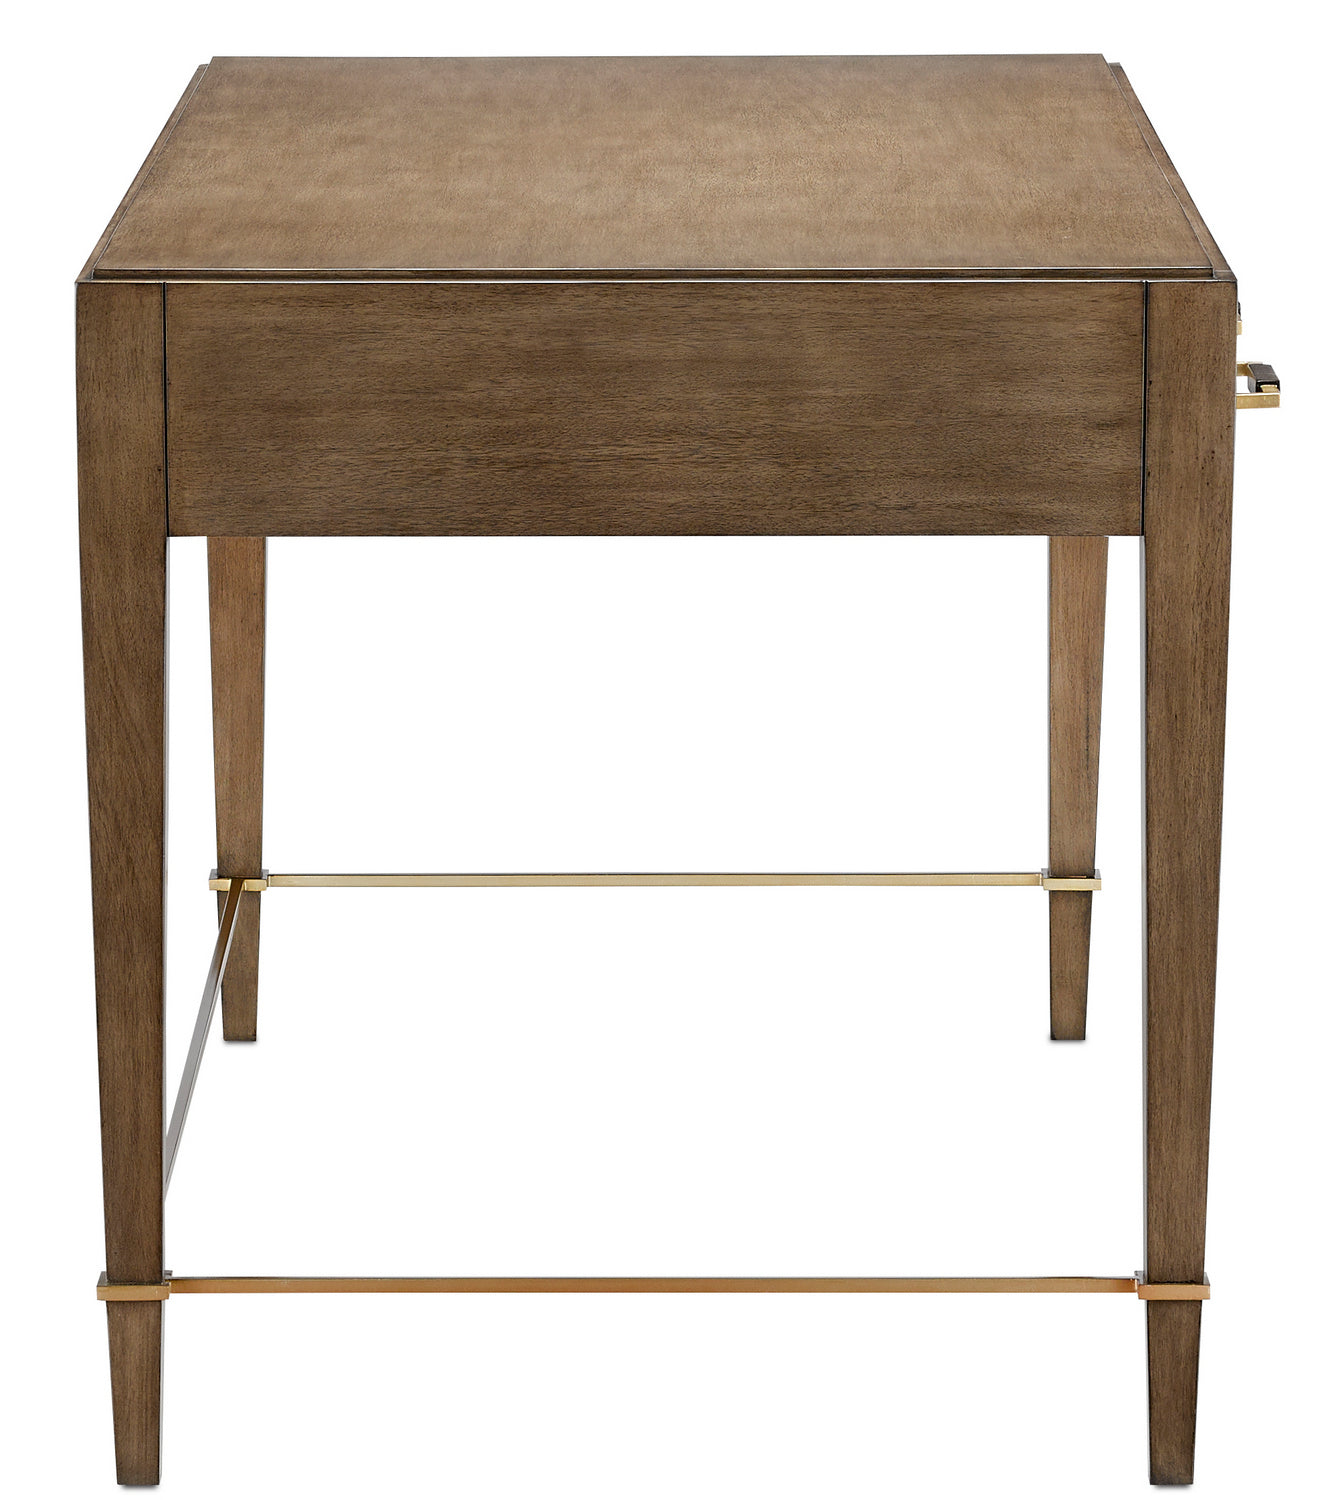 Desk from the Verona collection in Chanterelle/Coffee/Champagne finish